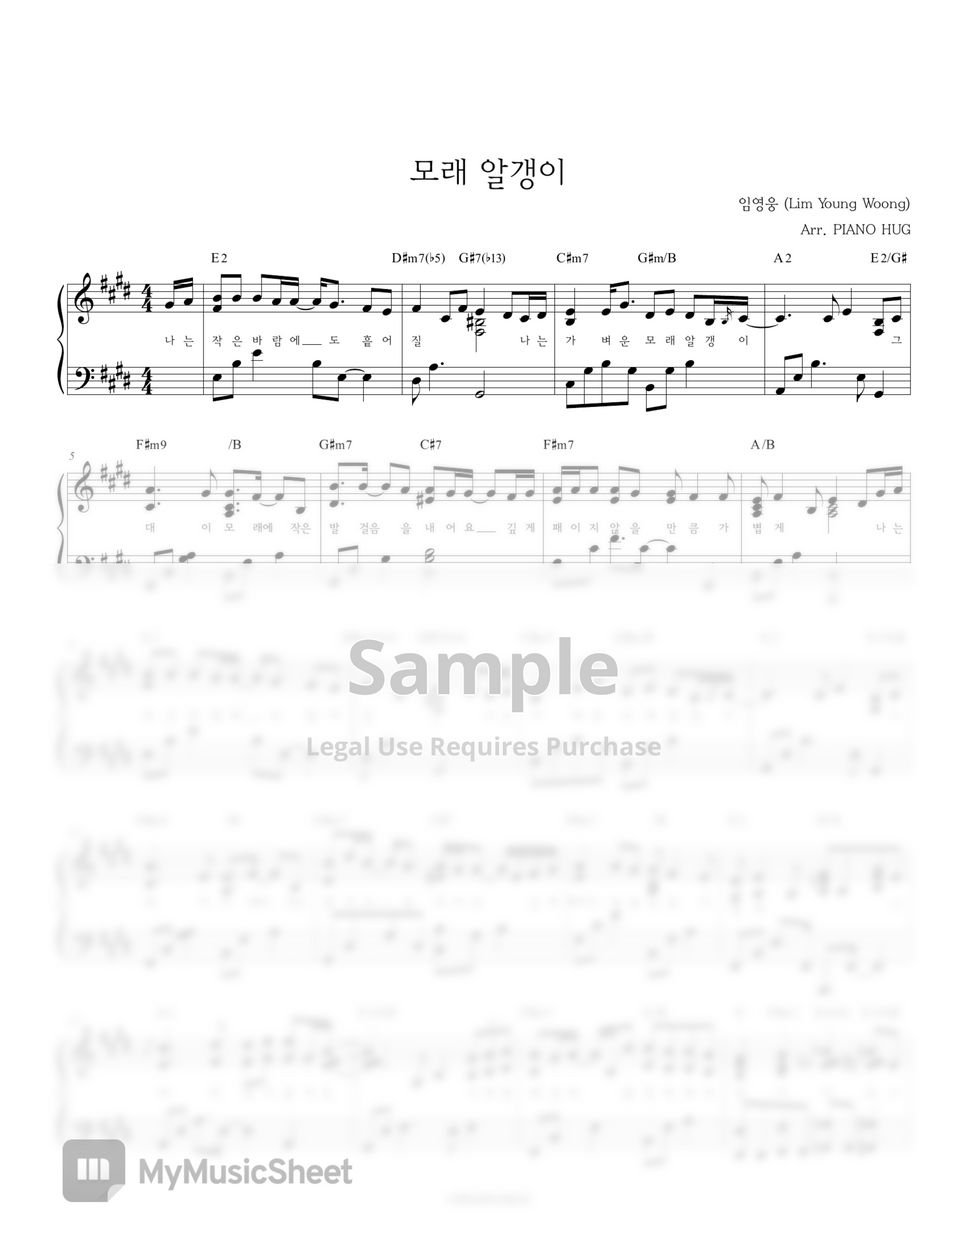 Lim Young Woong (임영웅) - 모래 알갱이 by Piano Hug